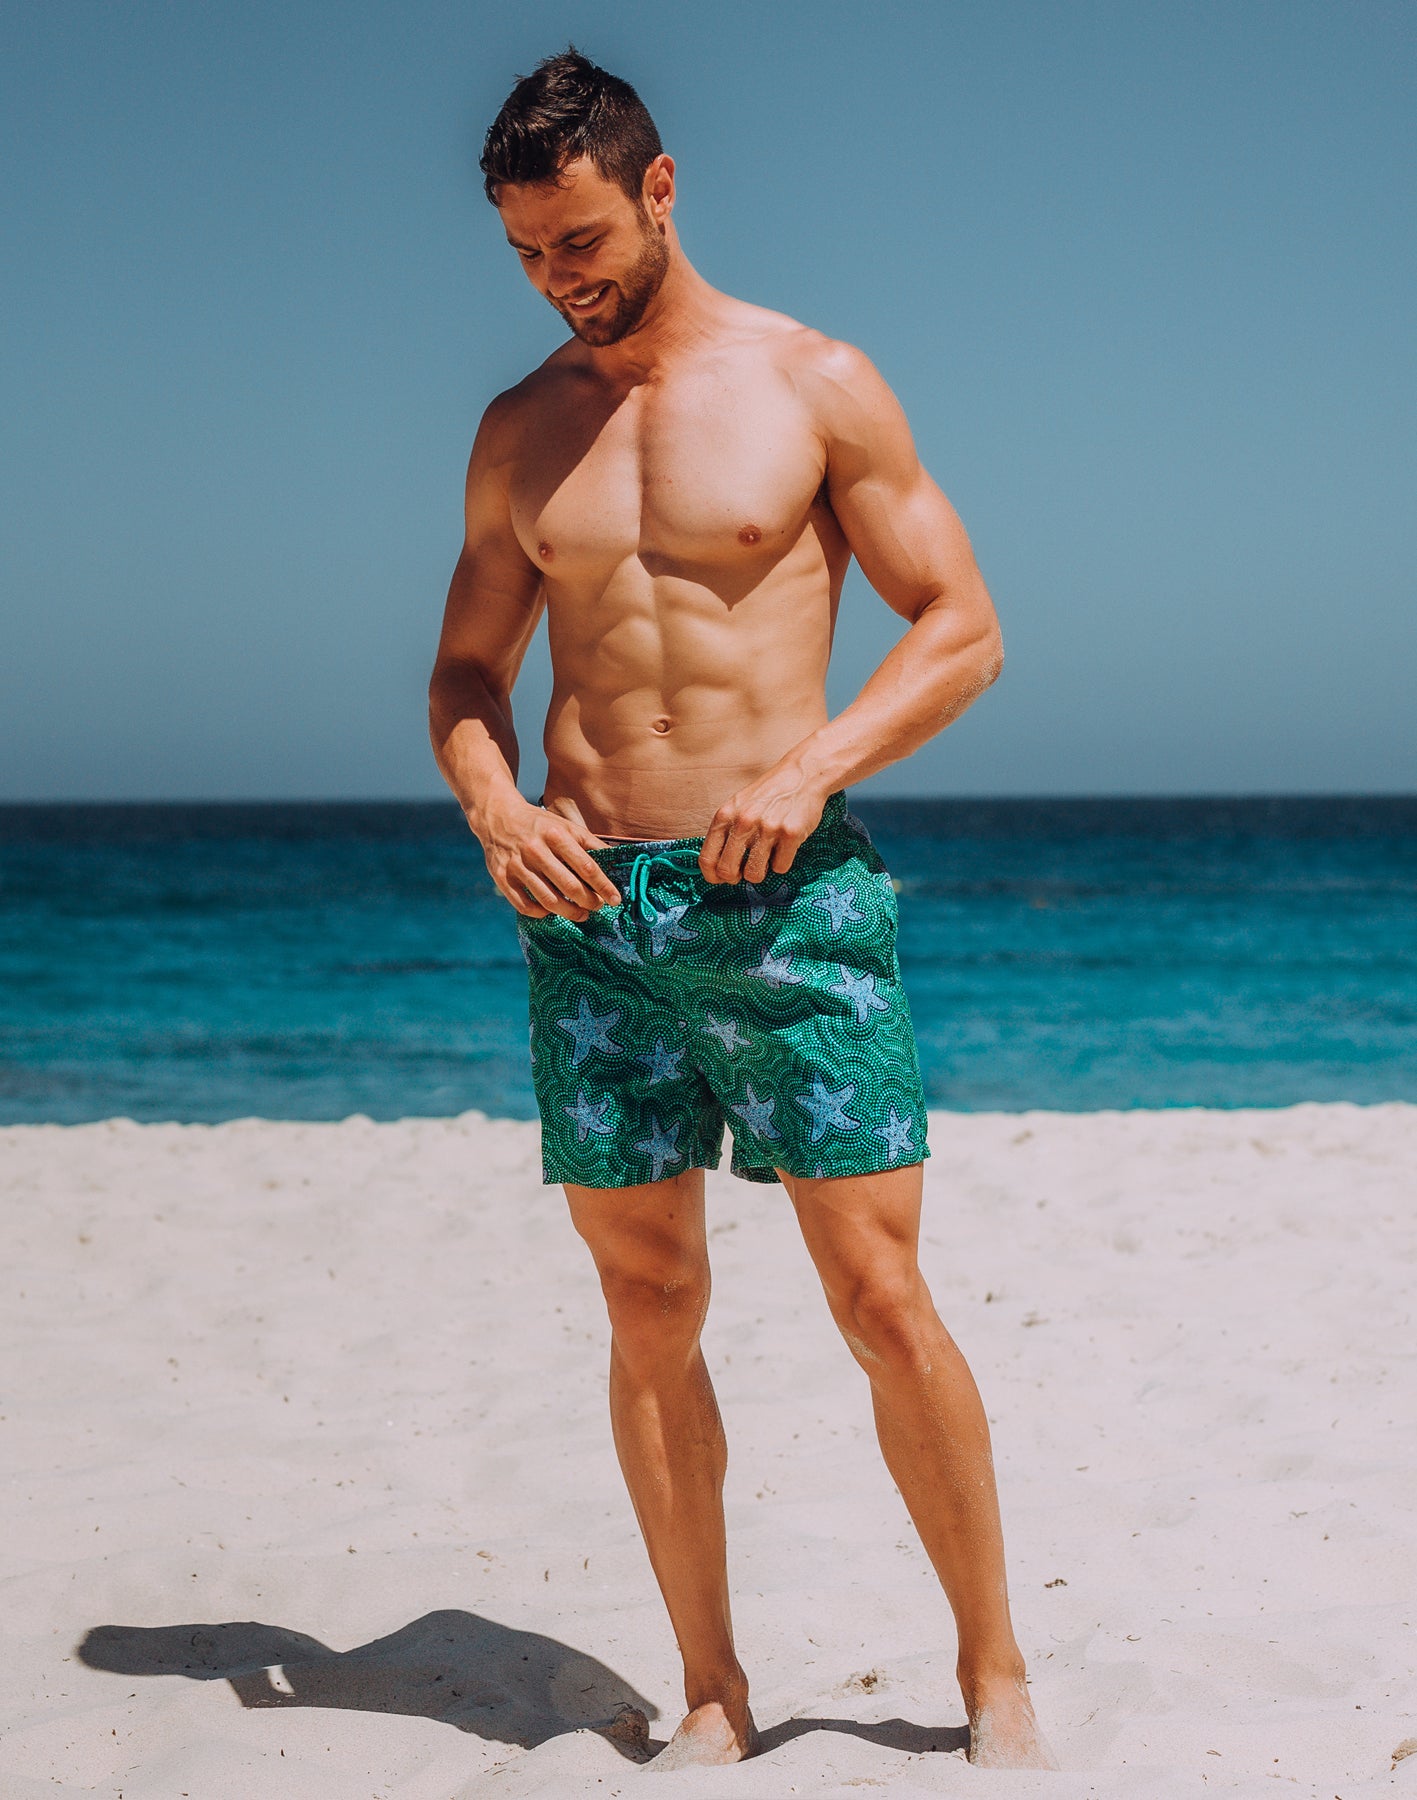 Sustainable Men's Star Fish Print Shorts from SevenC's - Front View on model at beach